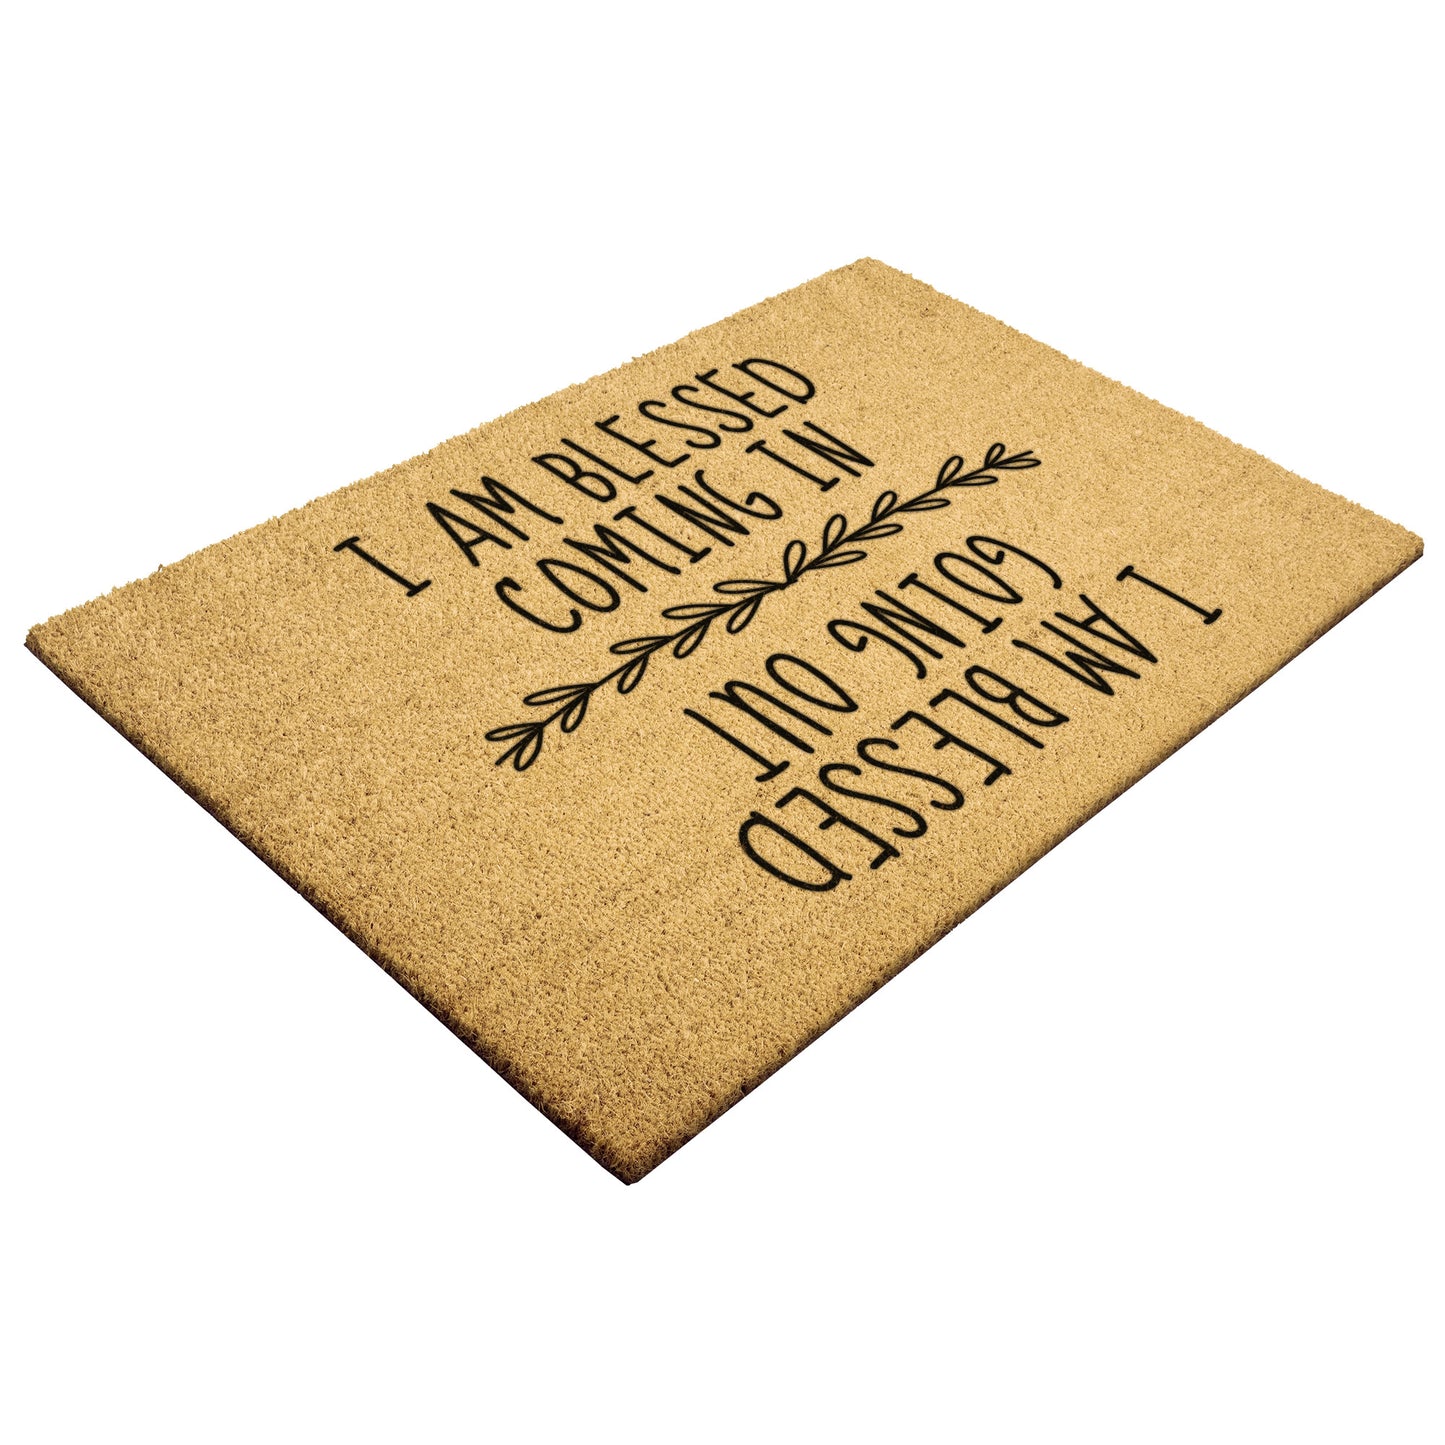 Blessed Coming In Blessed Going Out Outdoor Golden Coir Doormat